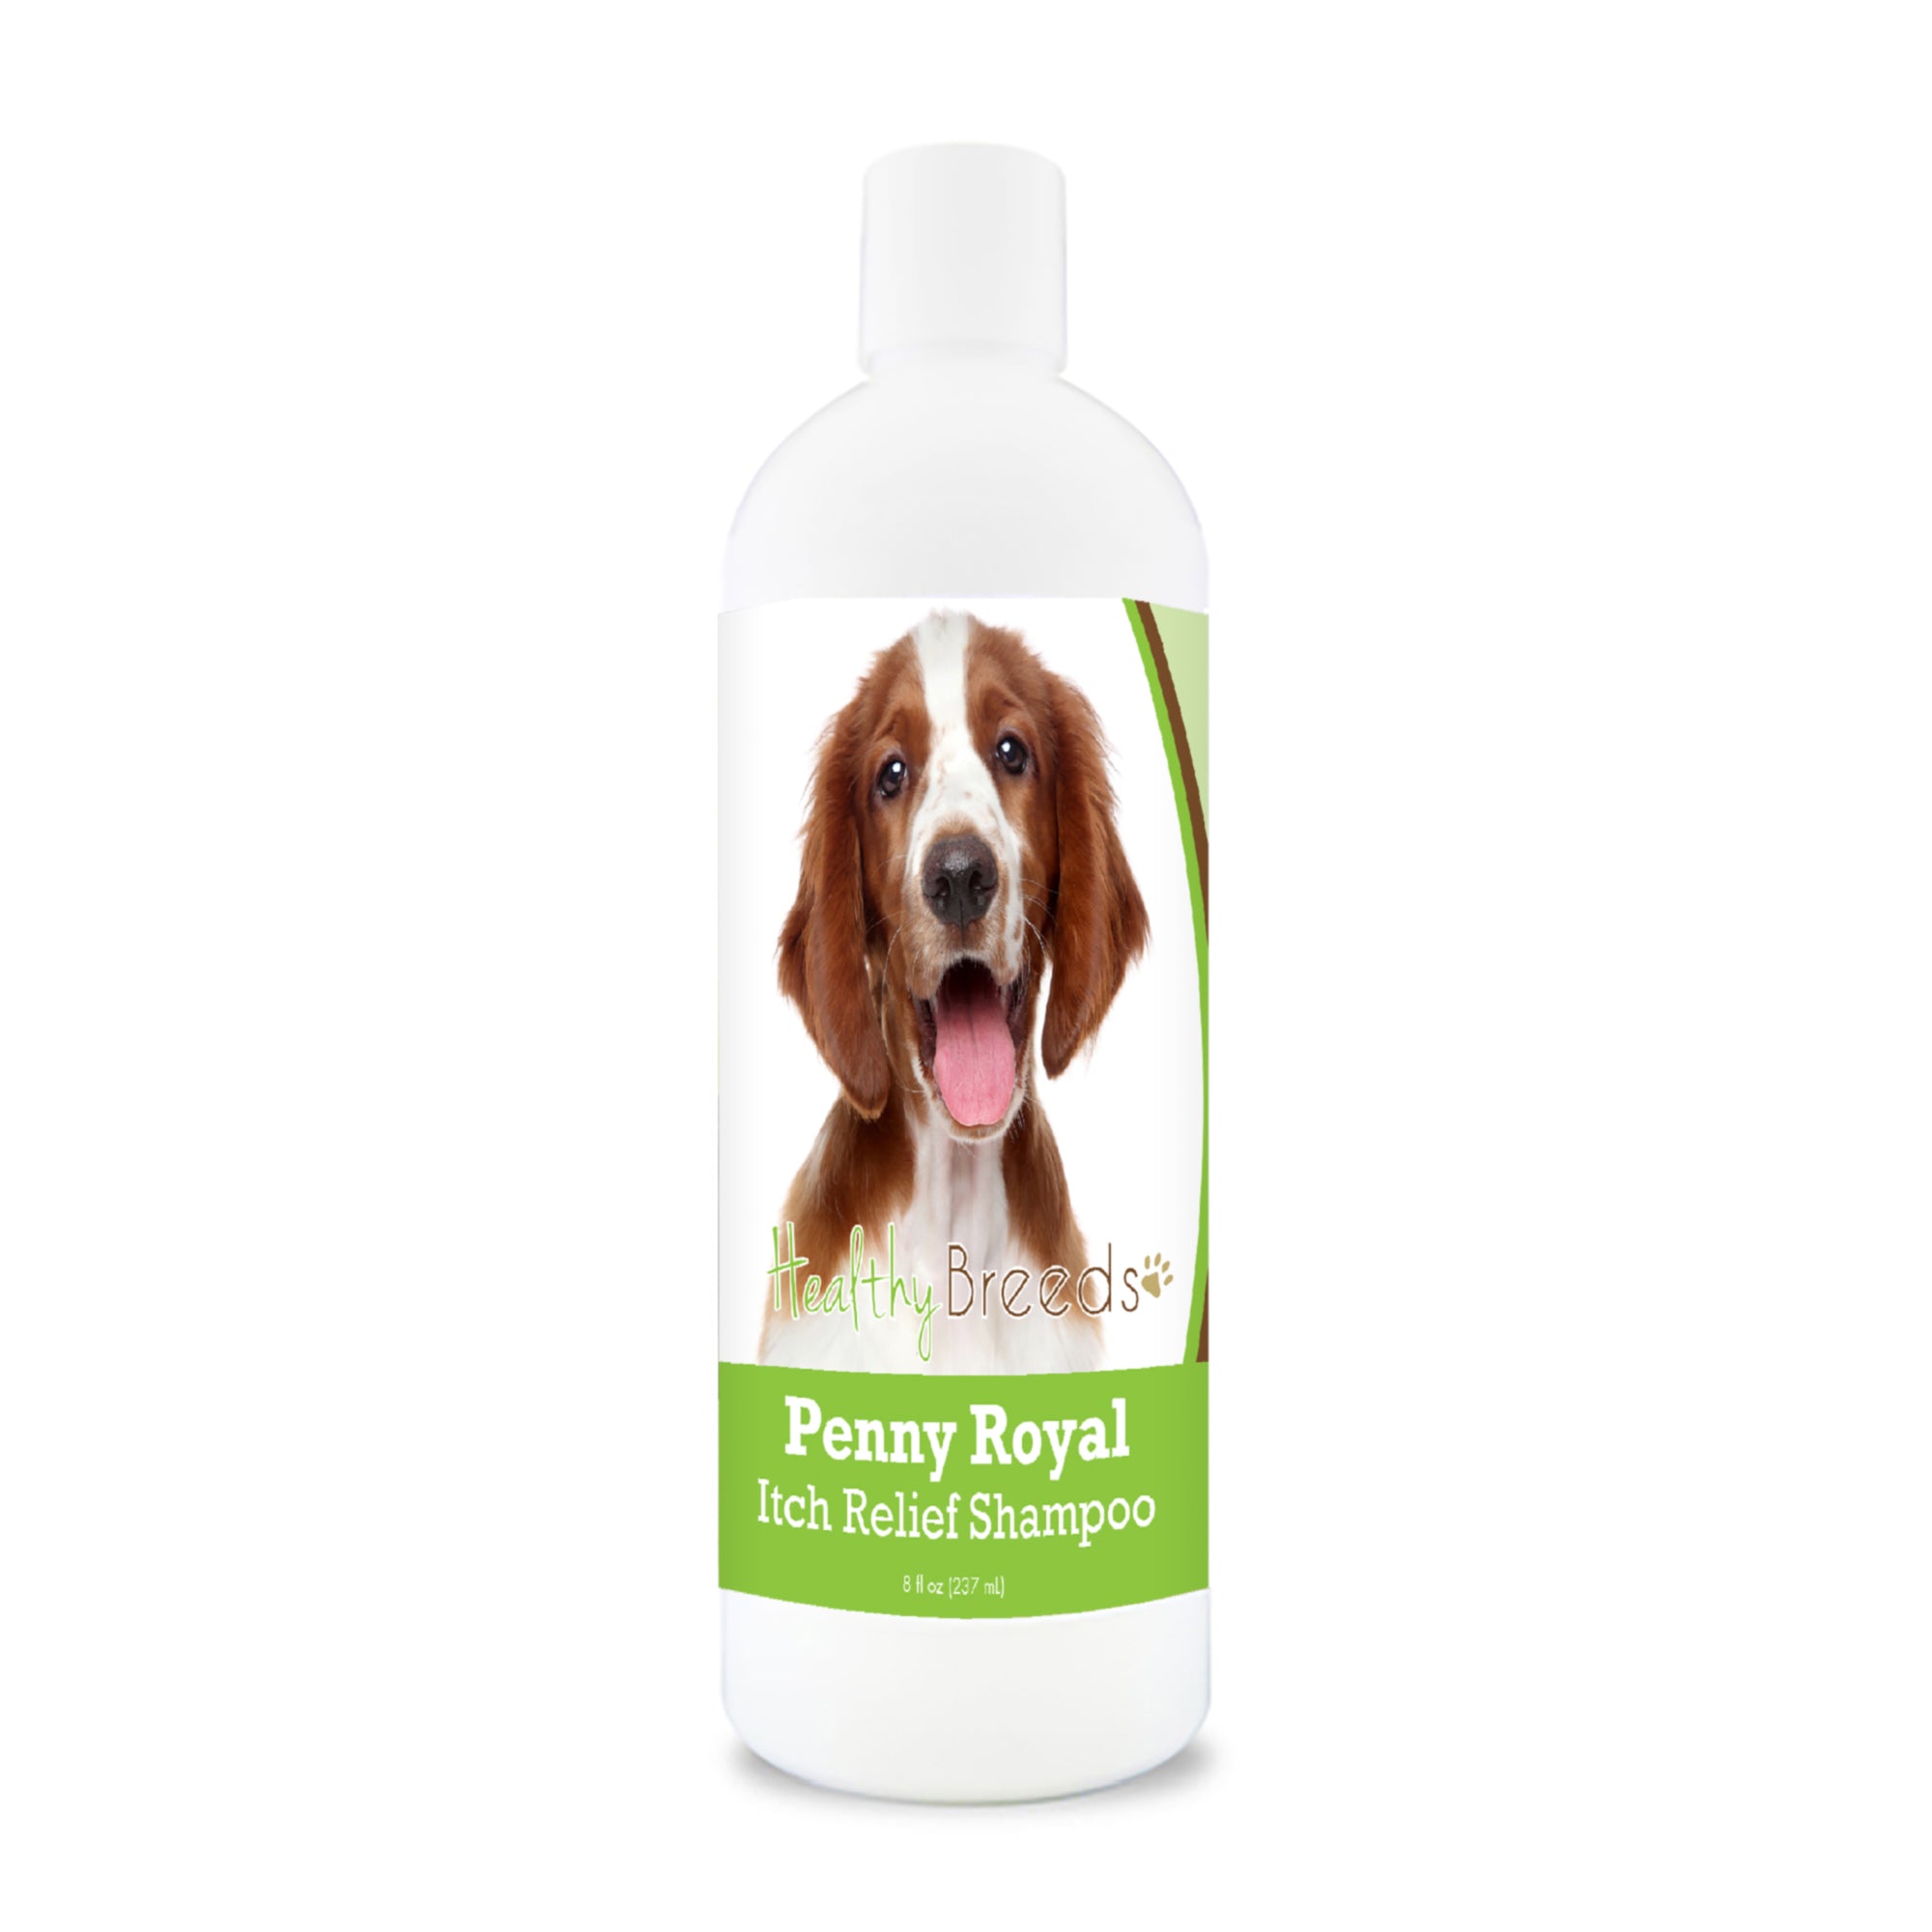 Welsh Springer Spaniel Penny Royal Itch Relief Shampoo 8 oz